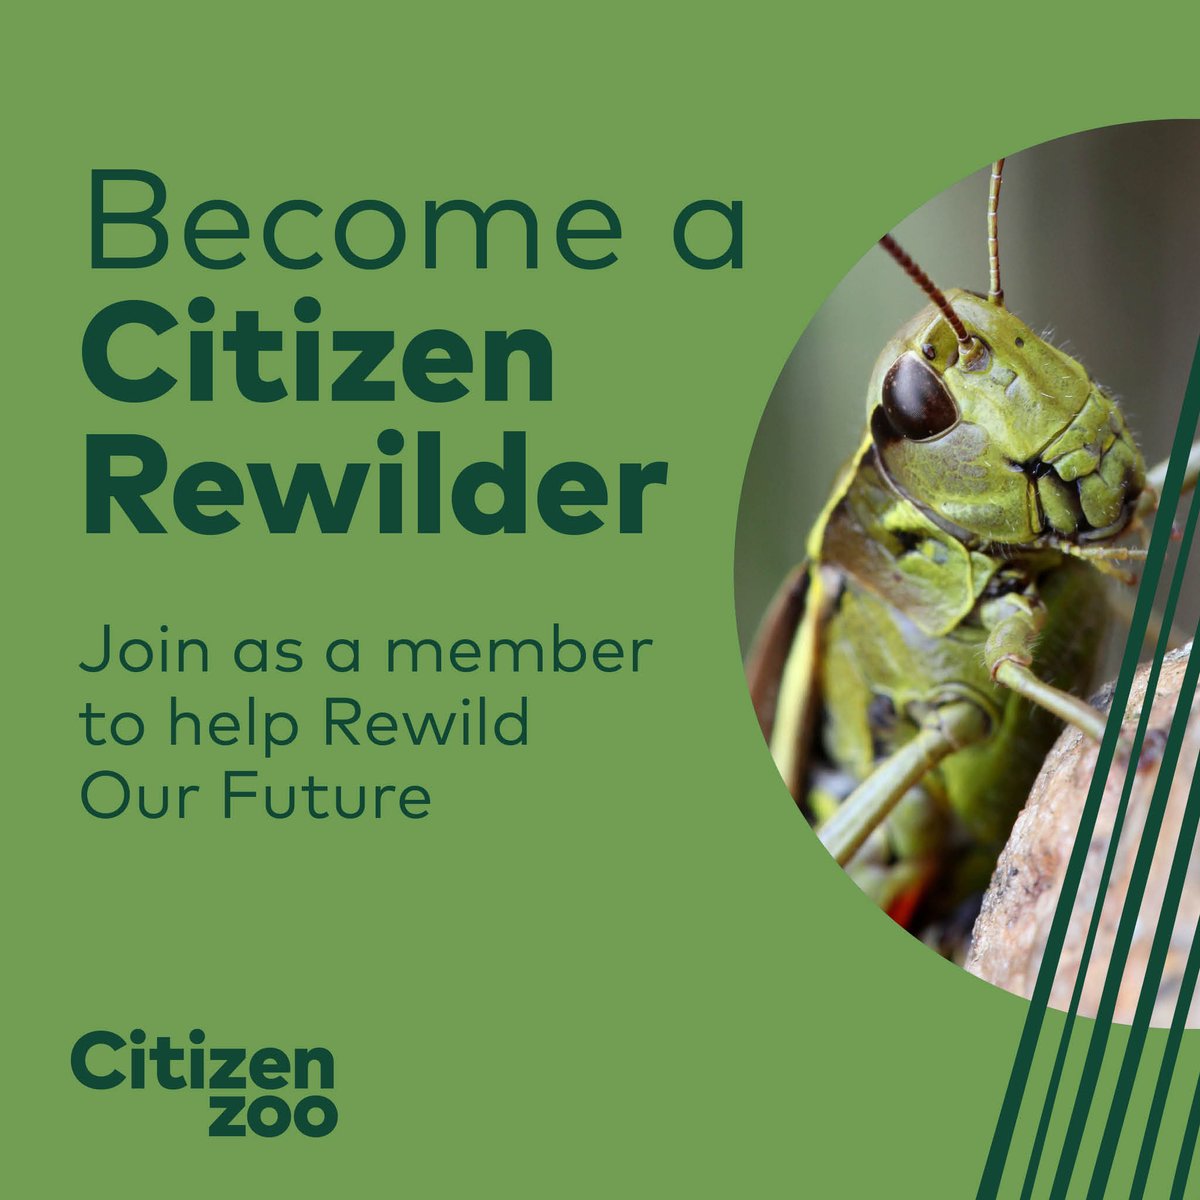 Happy Friday everyone! We're on a mission to Rewild Our Future, so for anyone keen to support this cause, then consider joining us today as a Citizen Rewilder! More info linked -> ow.ly/f9B750N9rWB #rewilding